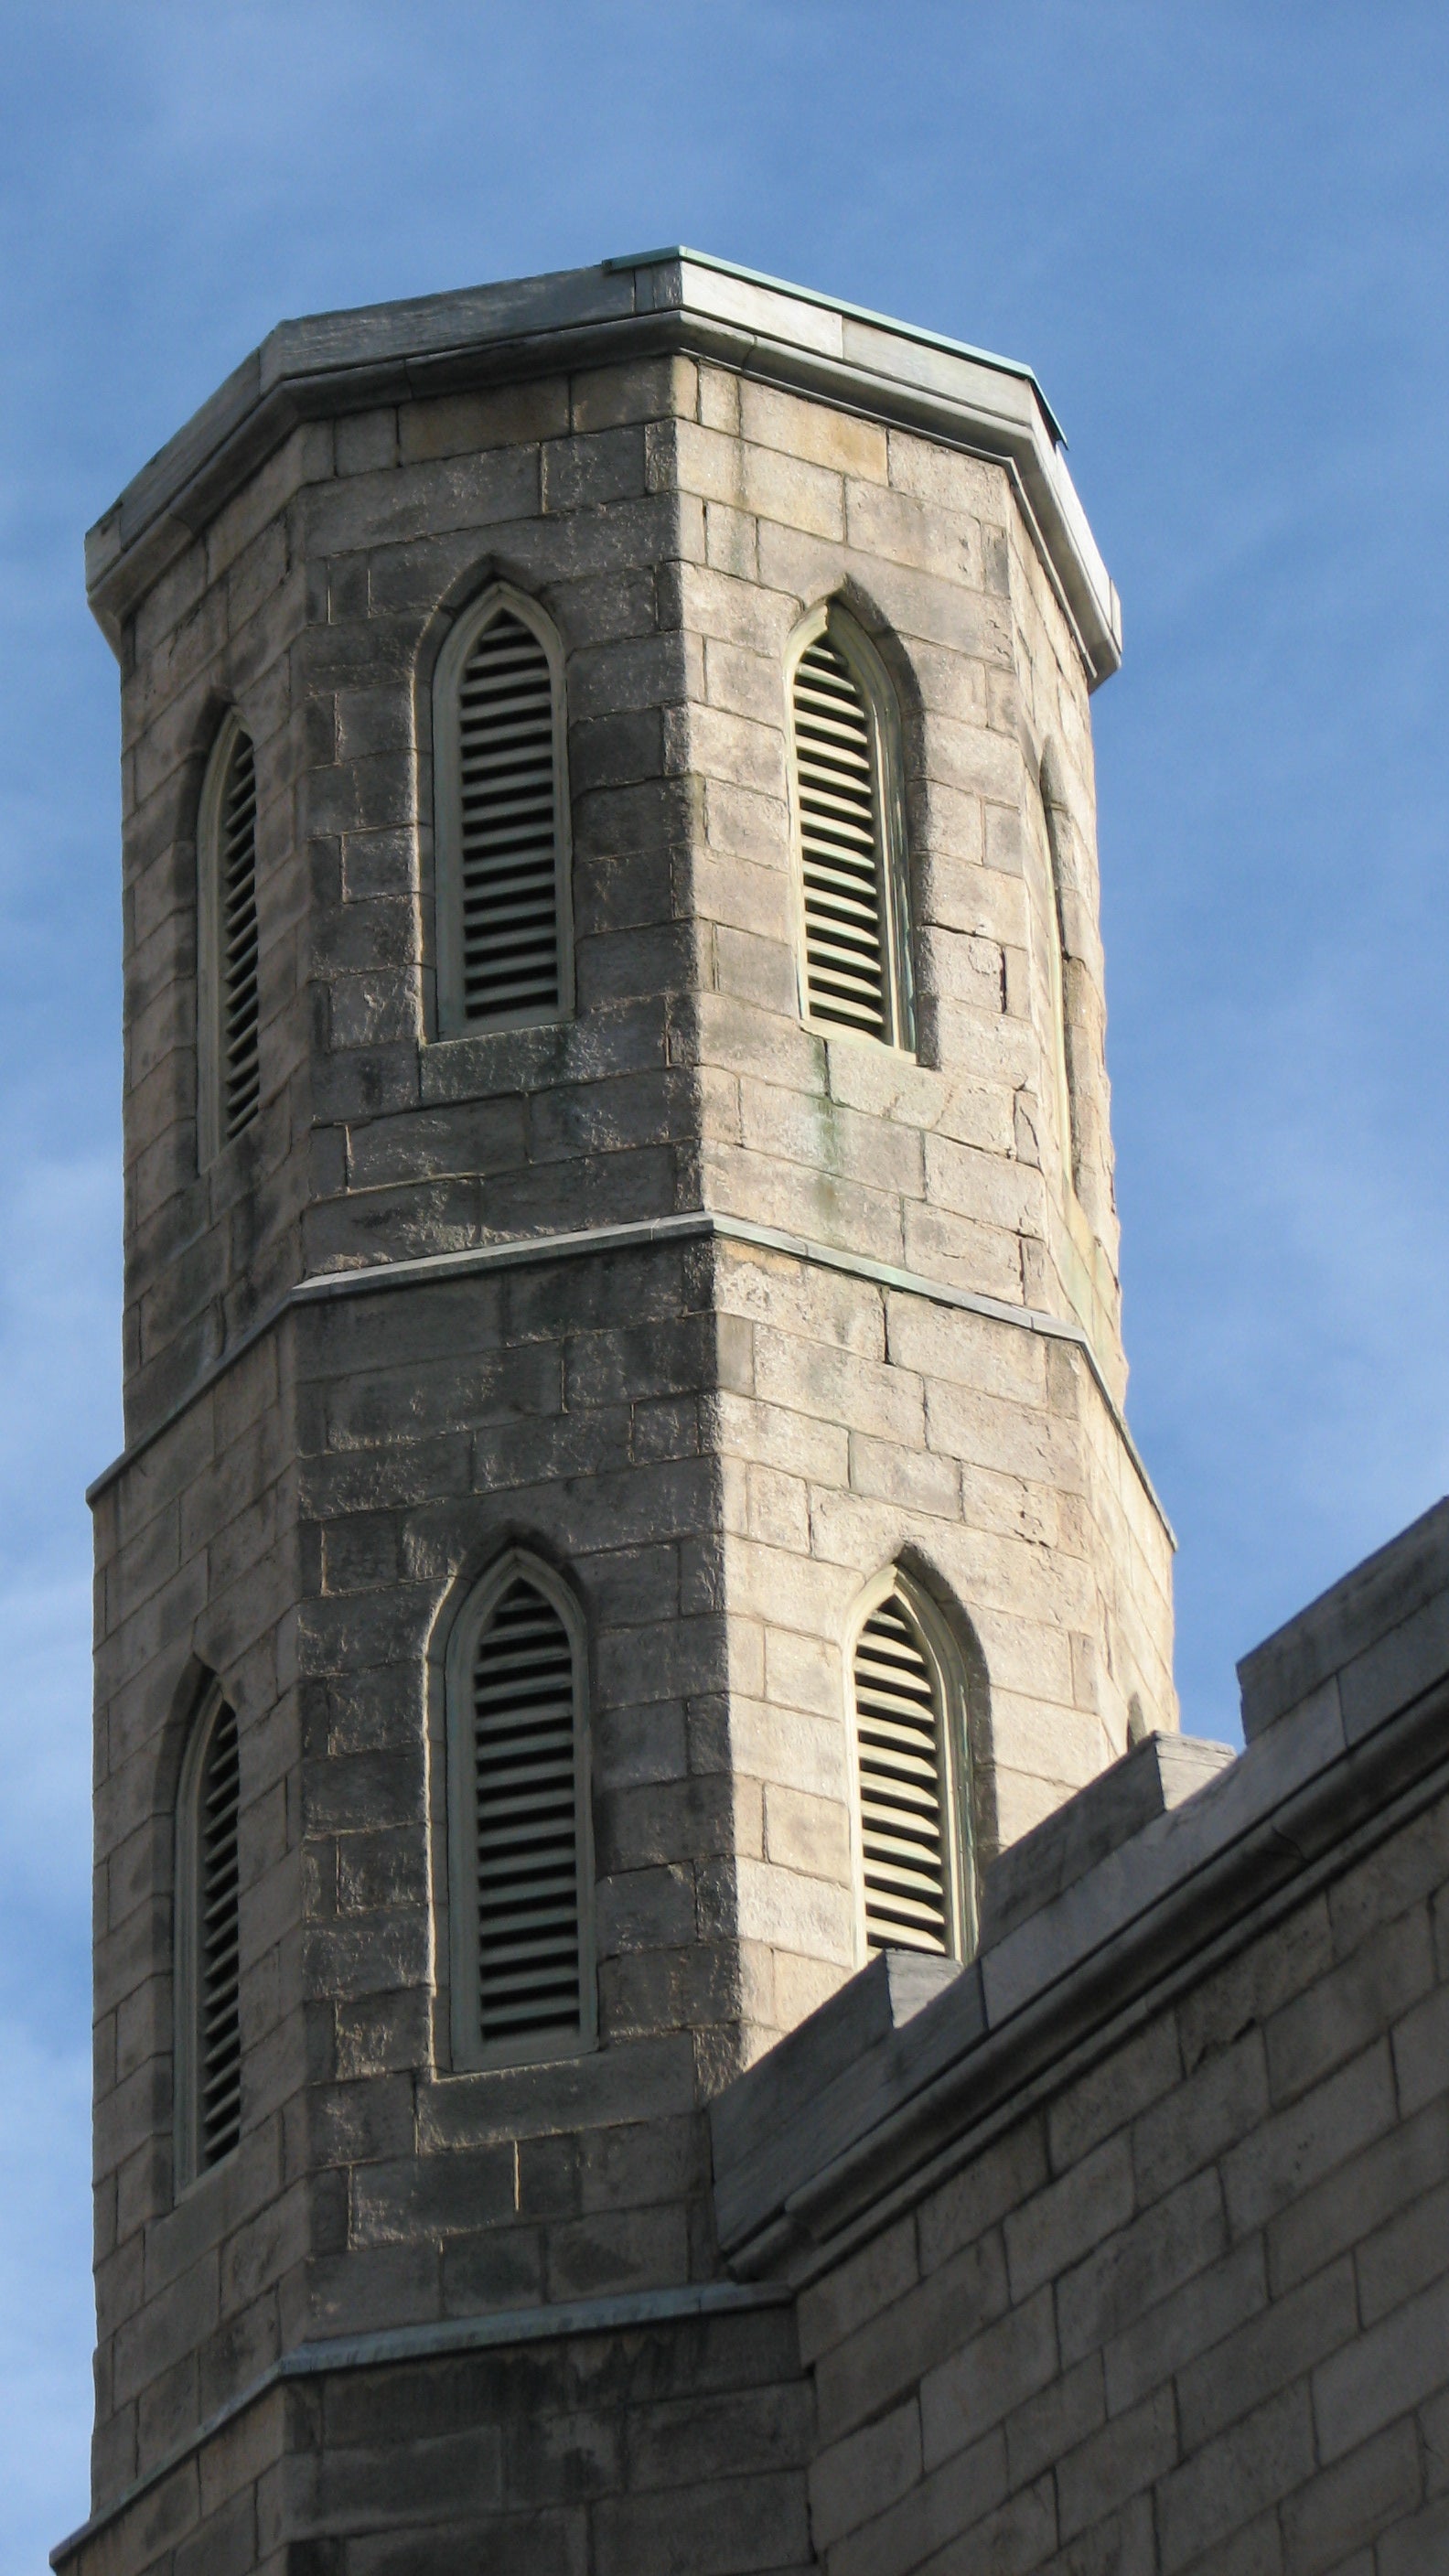 St. Stephen's tower